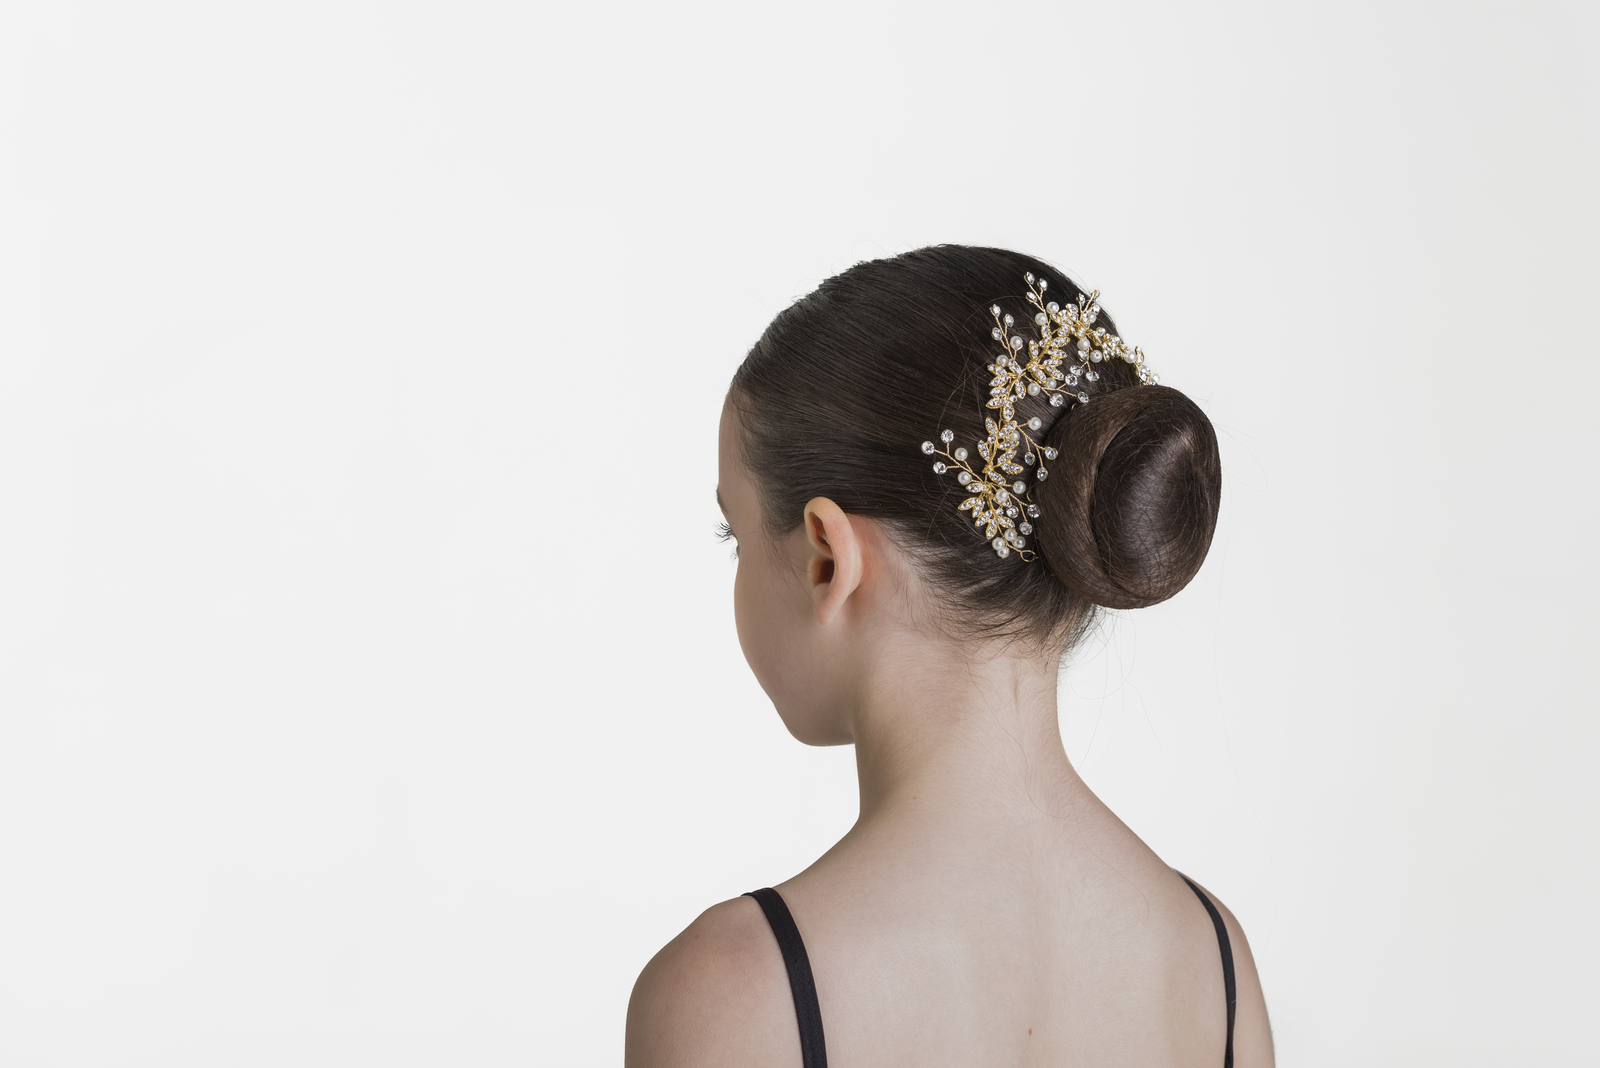 Studio 7 Blooming Sparkle Hairpiece